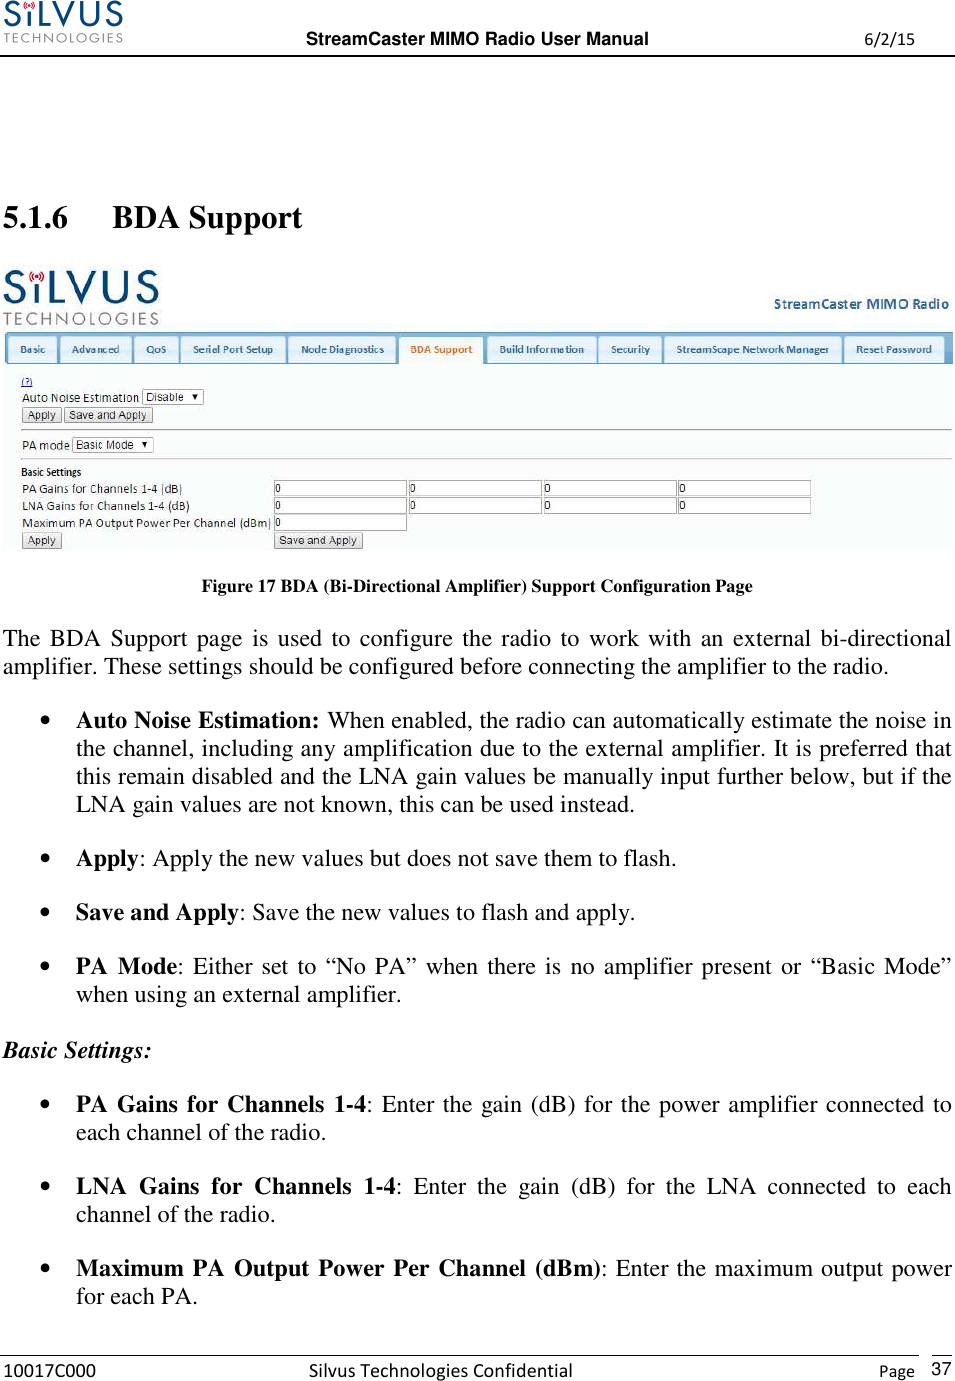  StreamCaster MIMO Radio User Manual  6/2/15 10017C000 Silvus Technologies Confidential    Page   37   5.1.6 BDA Support  Figure 17 BDA (Bi-Directional Amplifier) Support Configuration Page The BDA Support page is used to configure the radio to work with an external bi-directional amplifier. These settings should be configured before connecting the amplifier to the radio. • Auto Noise Estimation: When enabled, the radio can automatically estimate the noise in the channel, including any amplification due to the external amplifier. It is preferred that this remain disabled and the LNA gain values be manually input further below, but if the LNA gain values are not known, this can be used instead. • Apply: Apply the new values but does not save them to flash. • Save and Apply: Save the new values to flash and apply. • PA Mode: Either set to “No PA” when there is no amplifier present or “Basic Mode” when using an external amplifier.  Basic Settings: • PA Gains for Channels 1-4: Enter the gain (dB) for the power amplifier connected to each channel of the radio. • LNA  Gains  for  Channels  1-4:  Enter  the  gain  (dB)  for  the  LNA  connected  to  each channel of the radio. • Maximum PA Output Power Per Channel (dBm): Enter the maximum output power for each PA. 